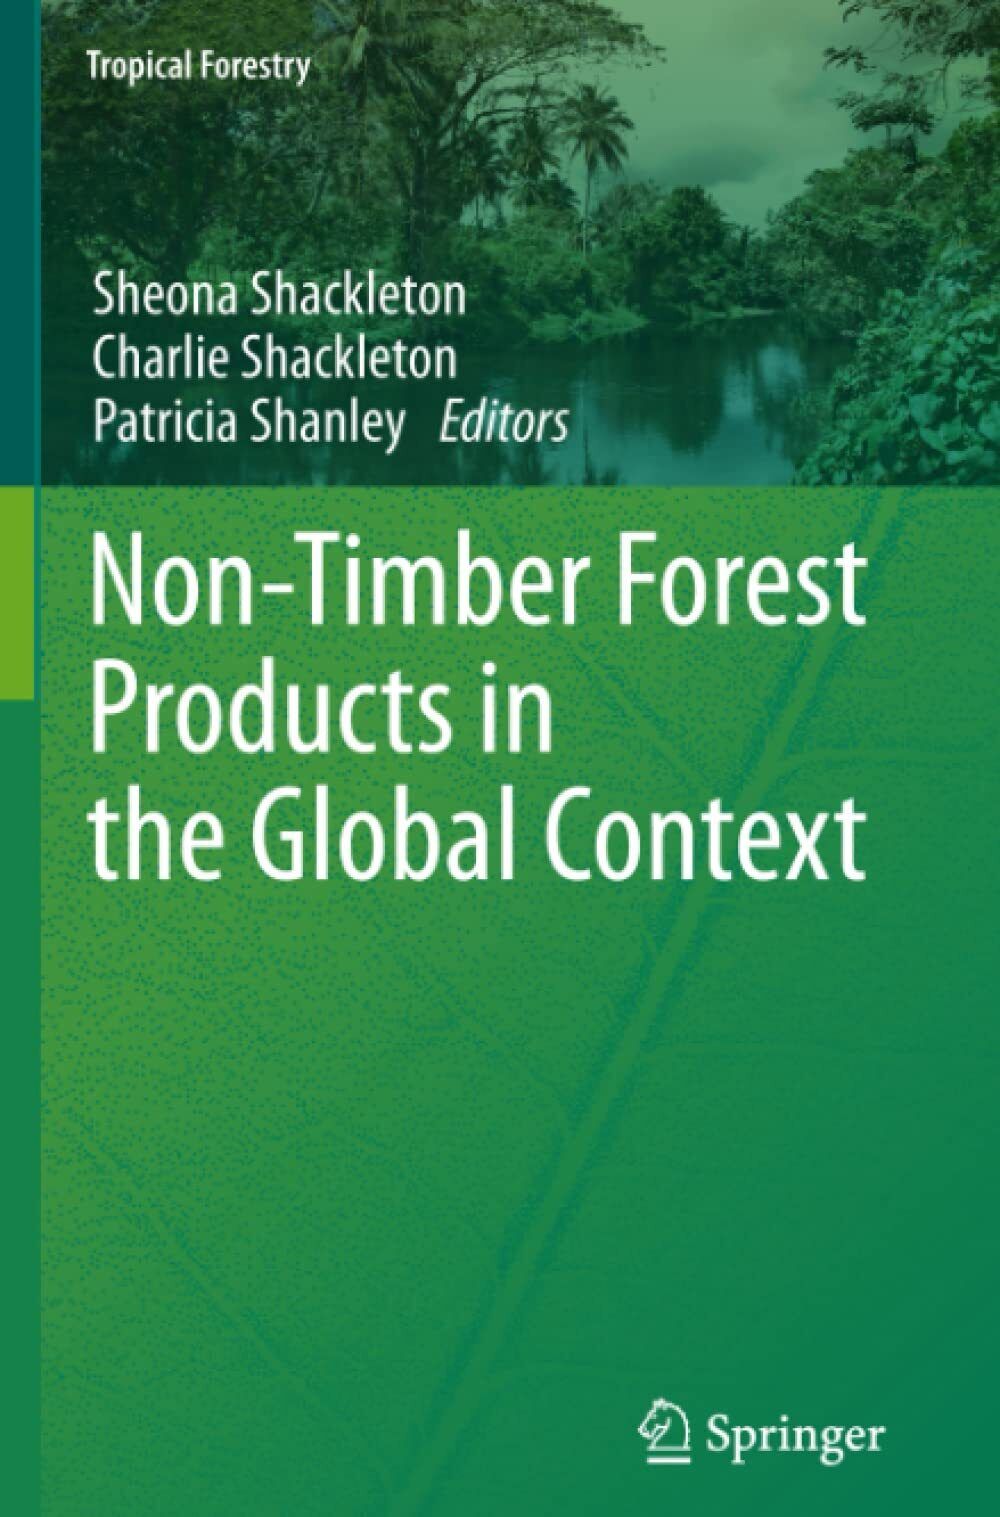 Non-Timber Forest Products in the Global Context: 7 - Sheona Shackleton - 2013 libro usato